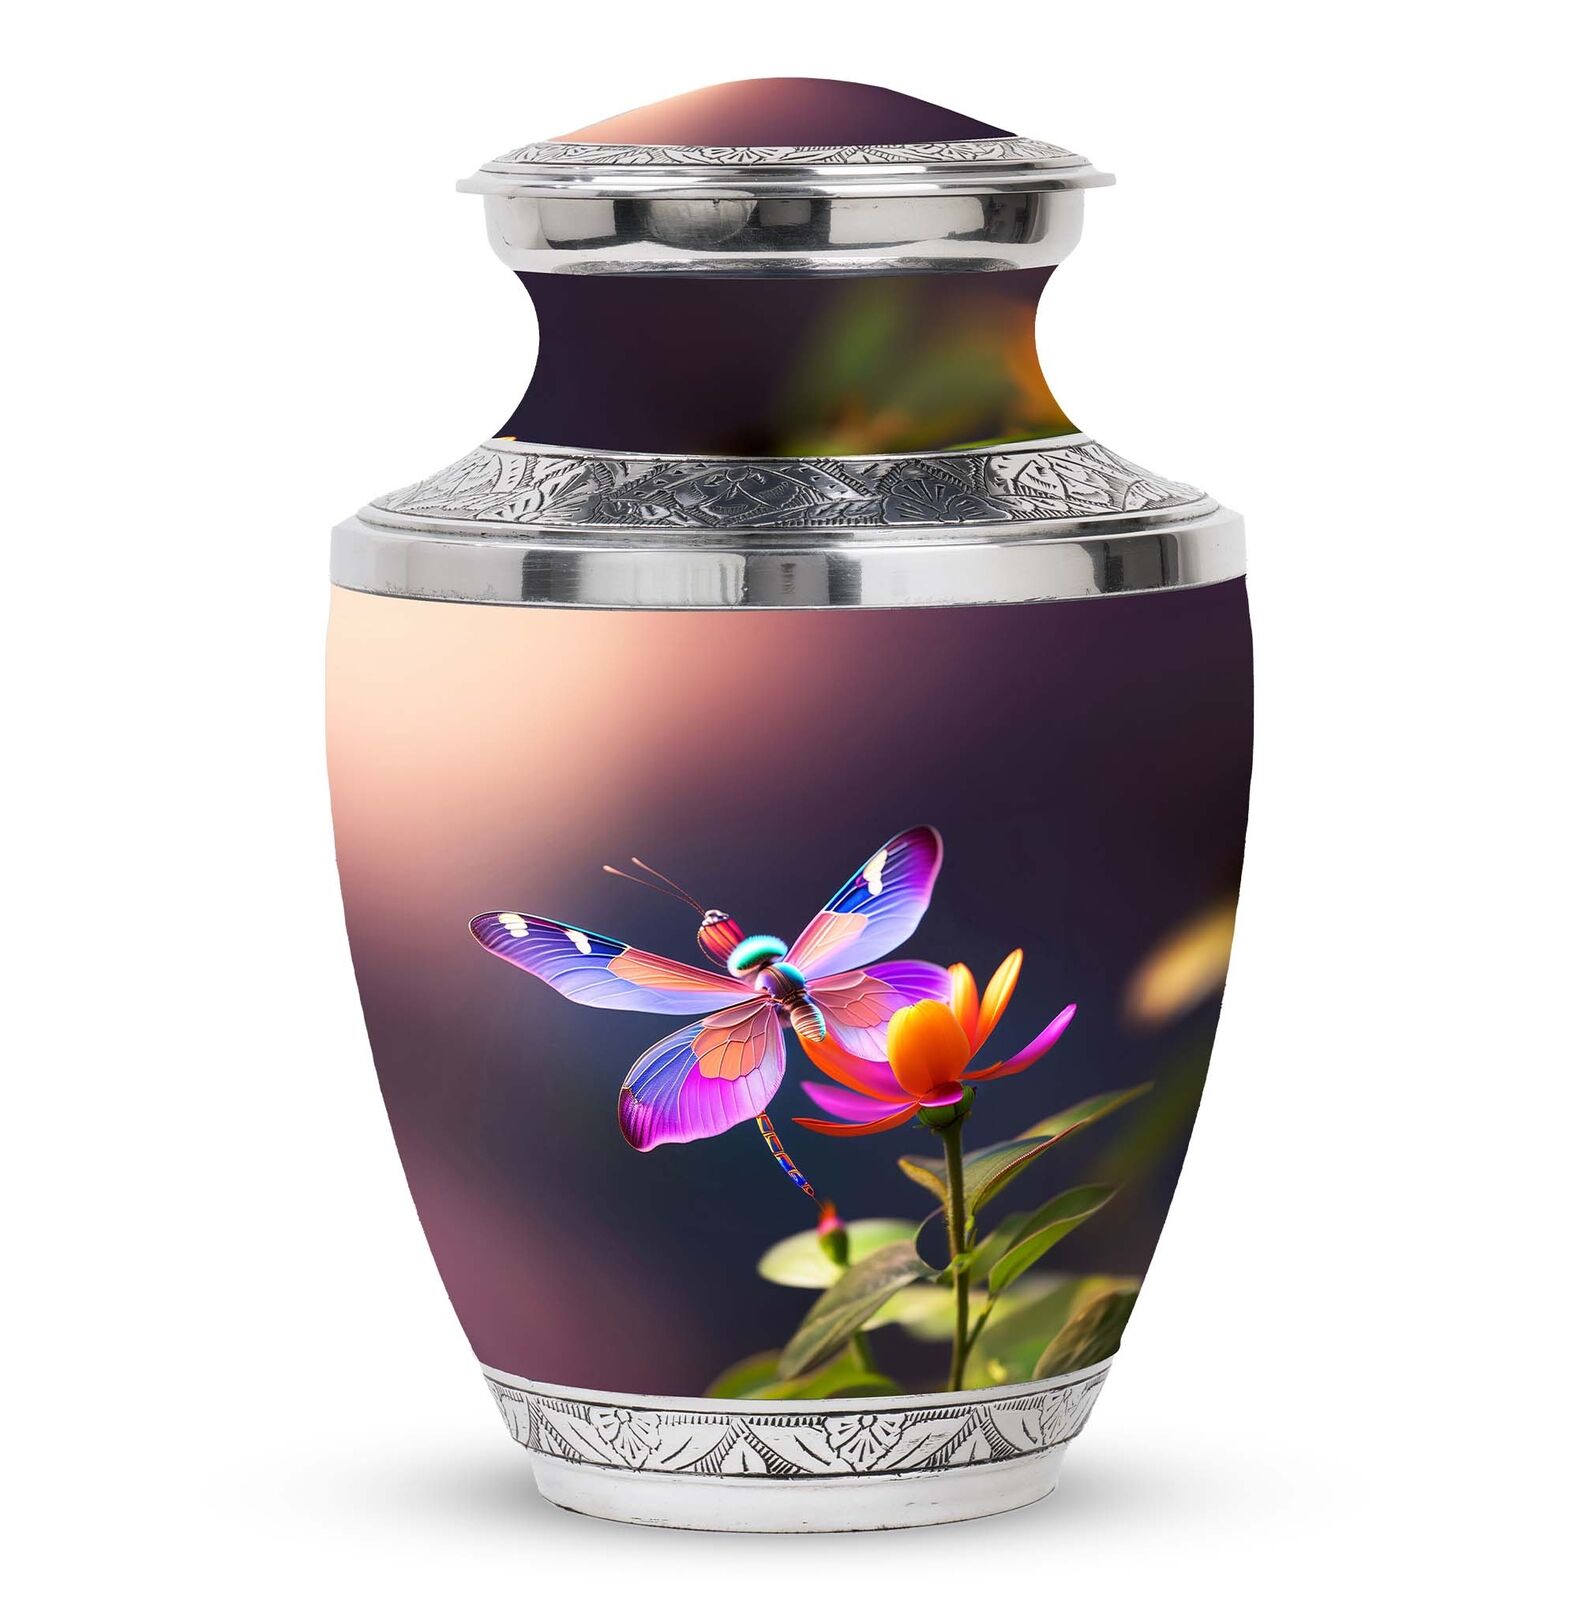 colorful dragonfly sits flower Large Modern Urns For Human Ashes 200 cubic inch